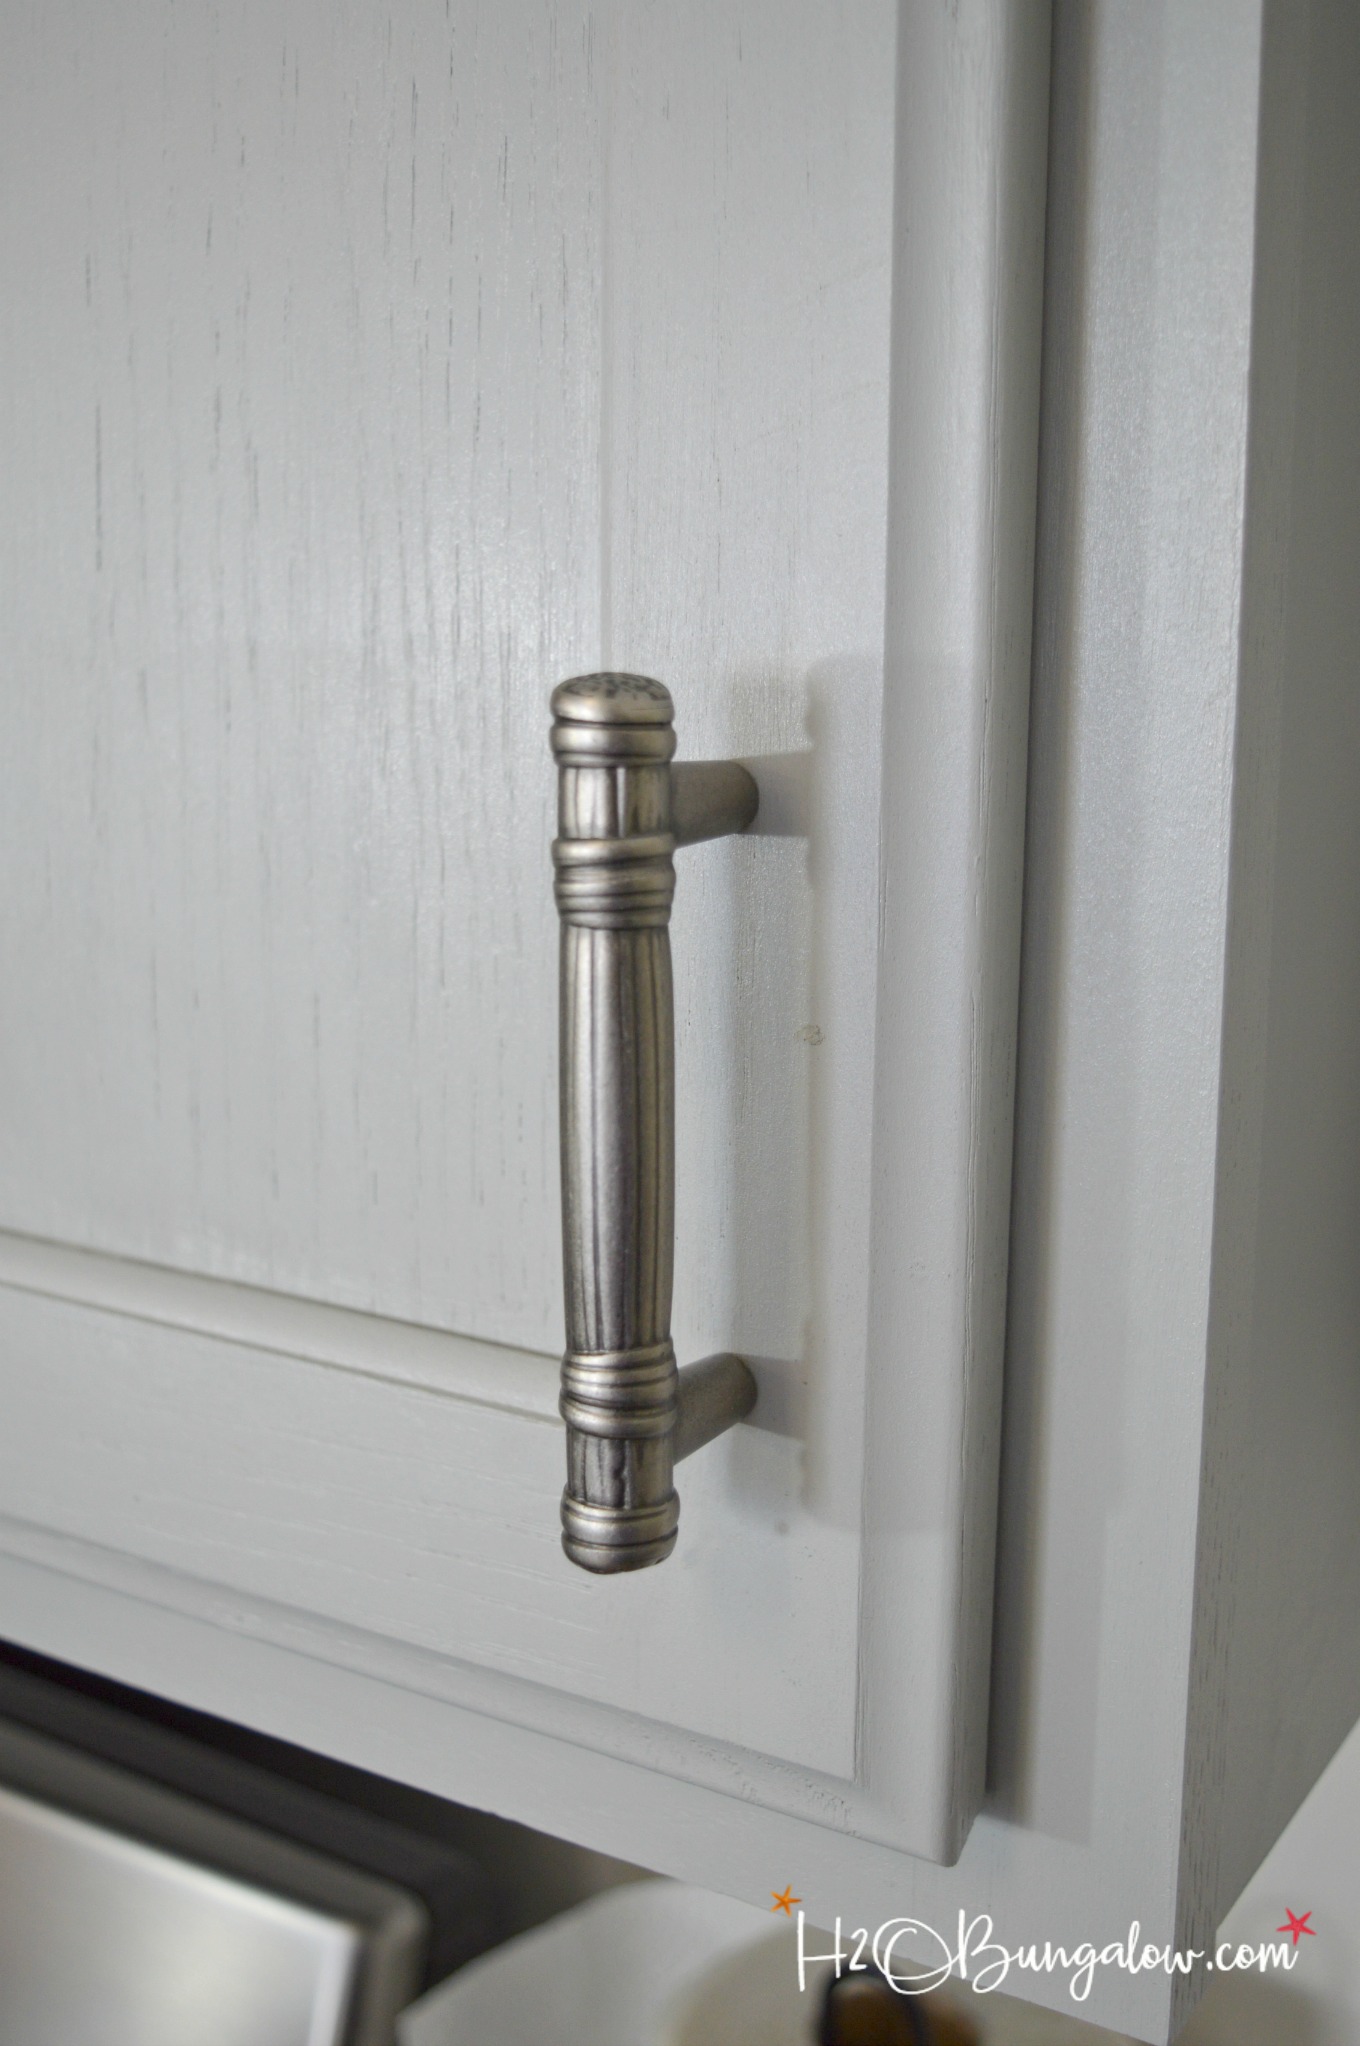 how to install knobs and pulls on cabinets and furniture - h2obungalow